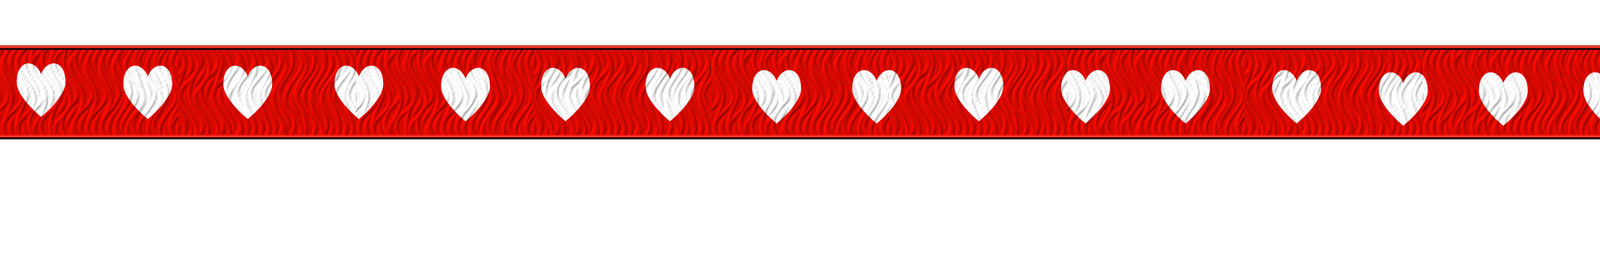 [red+hearts.png]